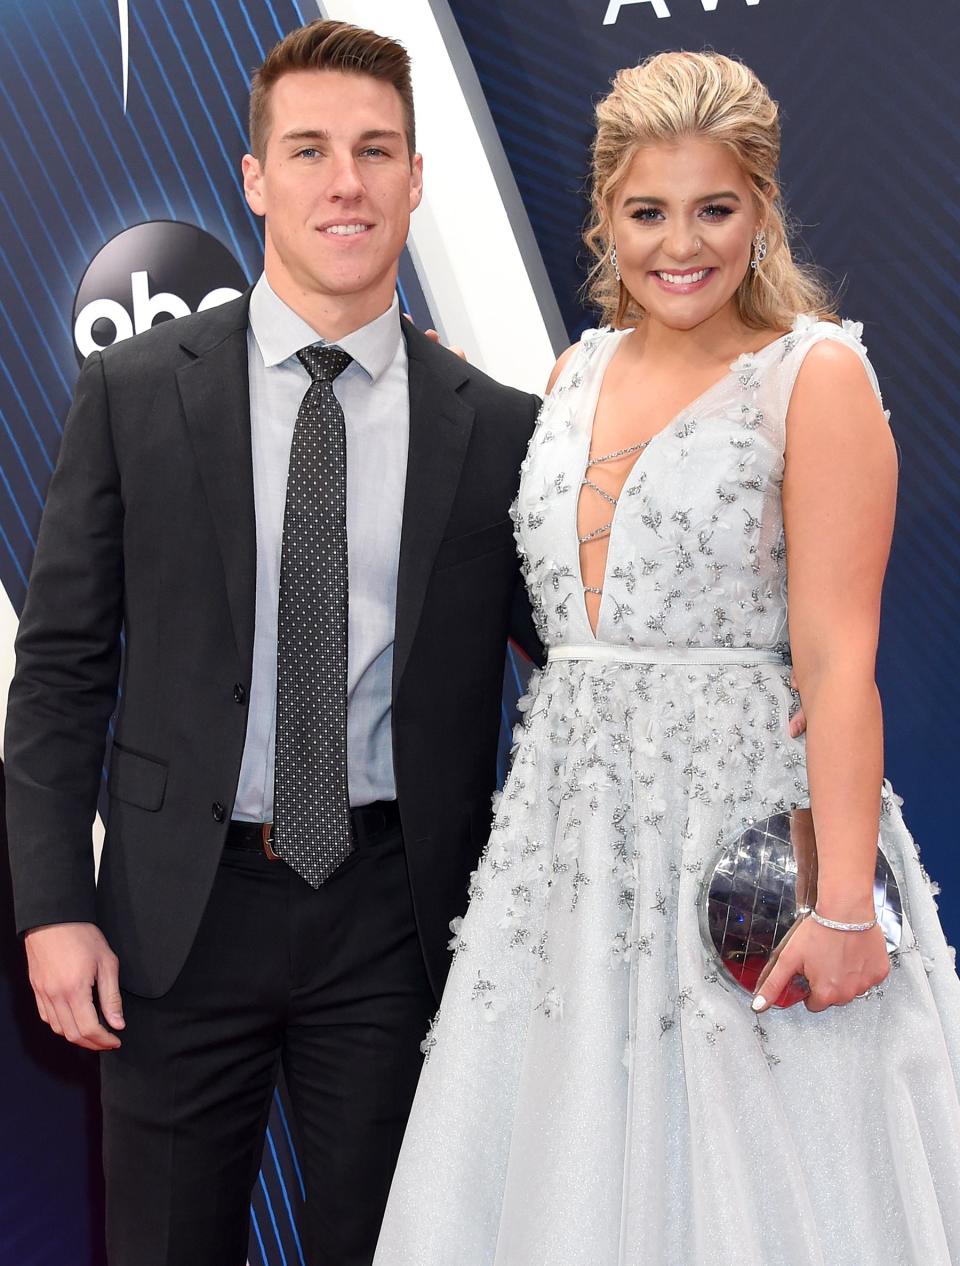 Lauren Alaina and Alex Hopkins End Their Engagement: 'This Has Not Been an Easy Decision'